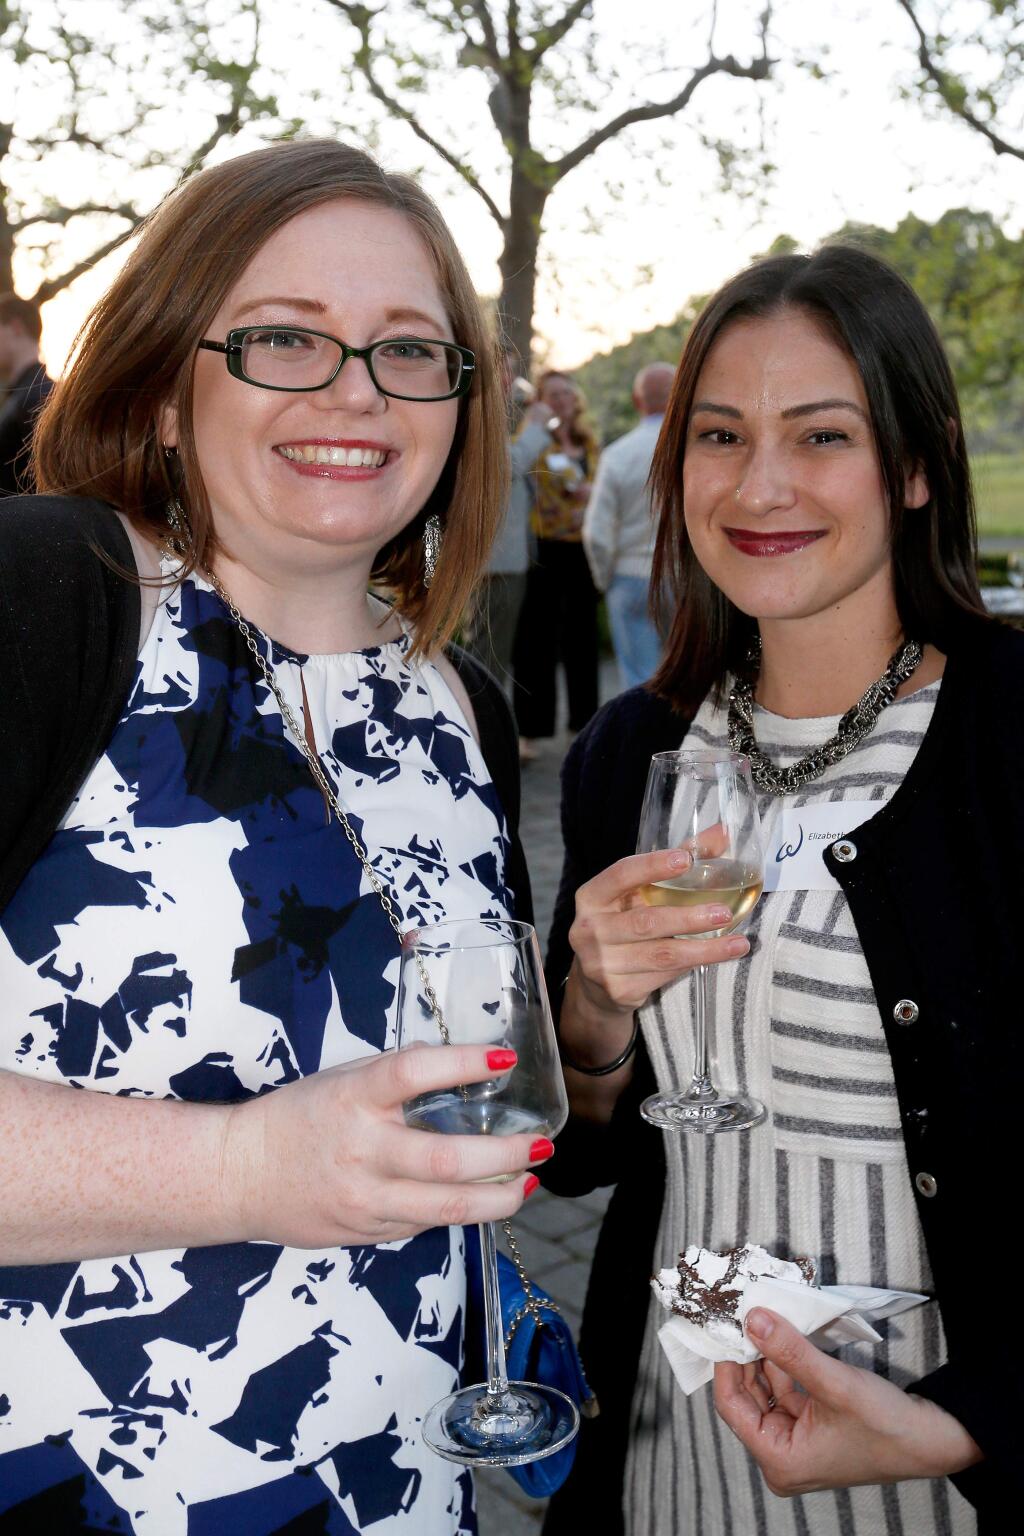 Sara Roberts, left, and Elizabeth Huayllara attend Reading Between the Vines, a fundraiser for United Way of the Wine Country's education initiatives, at Jordan Vineyard and Winery in Healdsburg, California, on Friday, March 31, 2017. (Alvin Jornada / The Press Democrat)